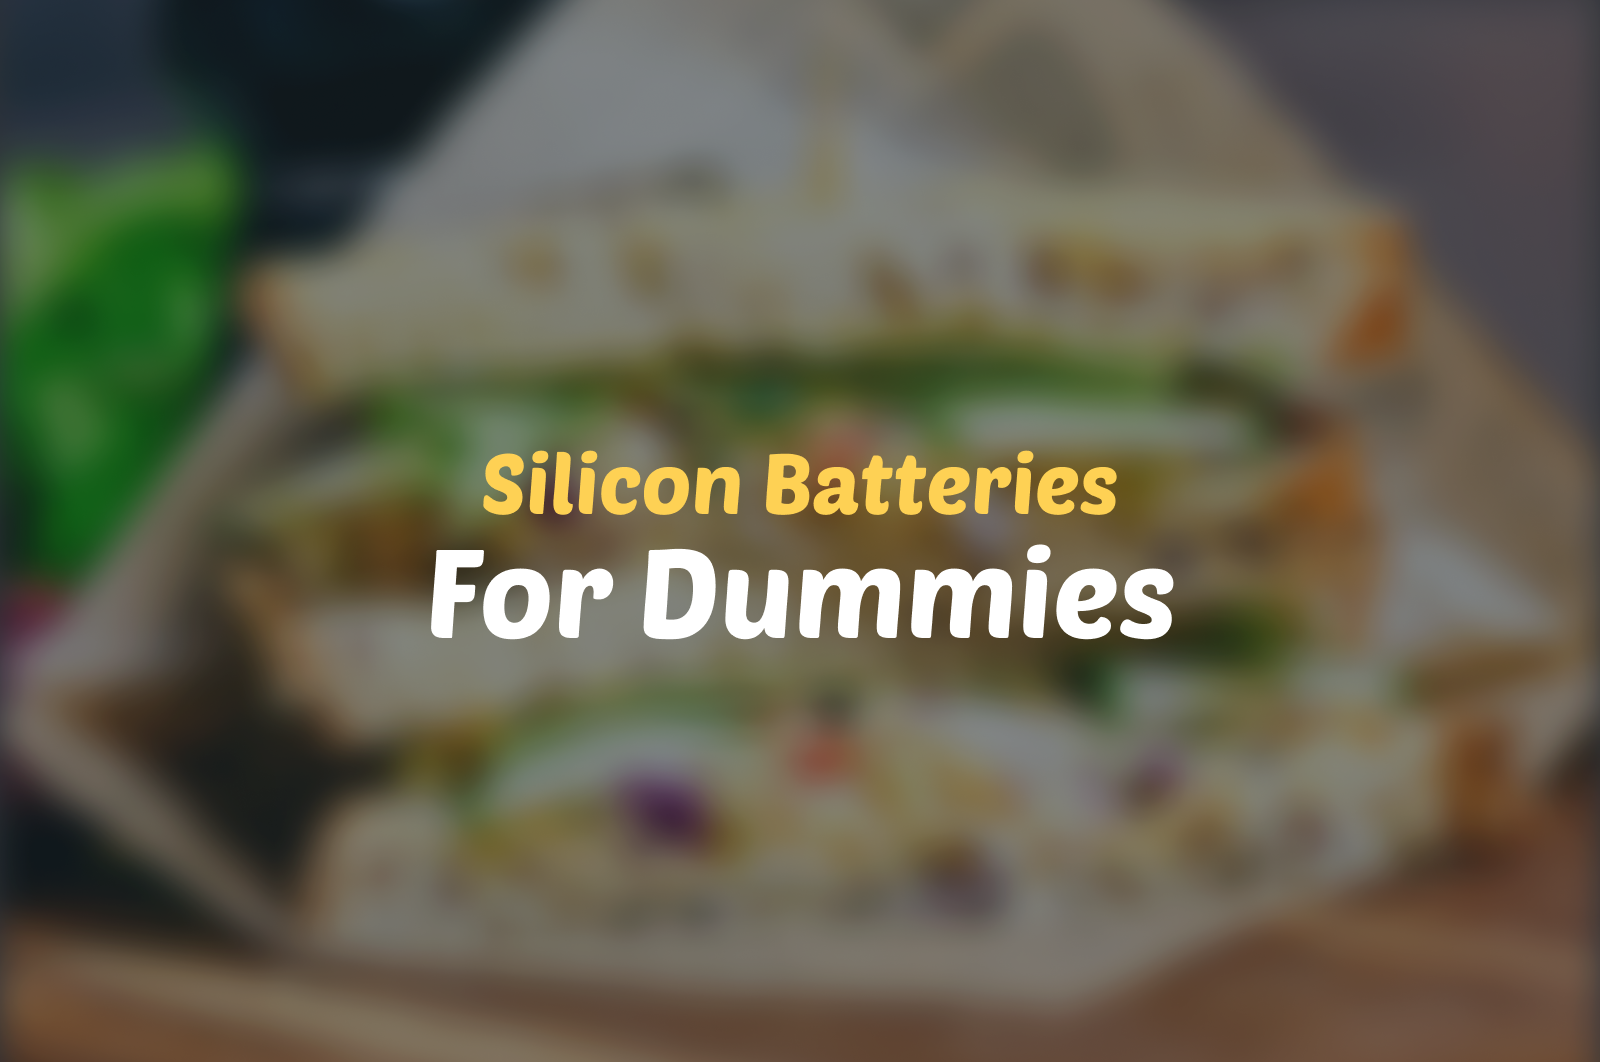 Silicon Batteries For Dummies